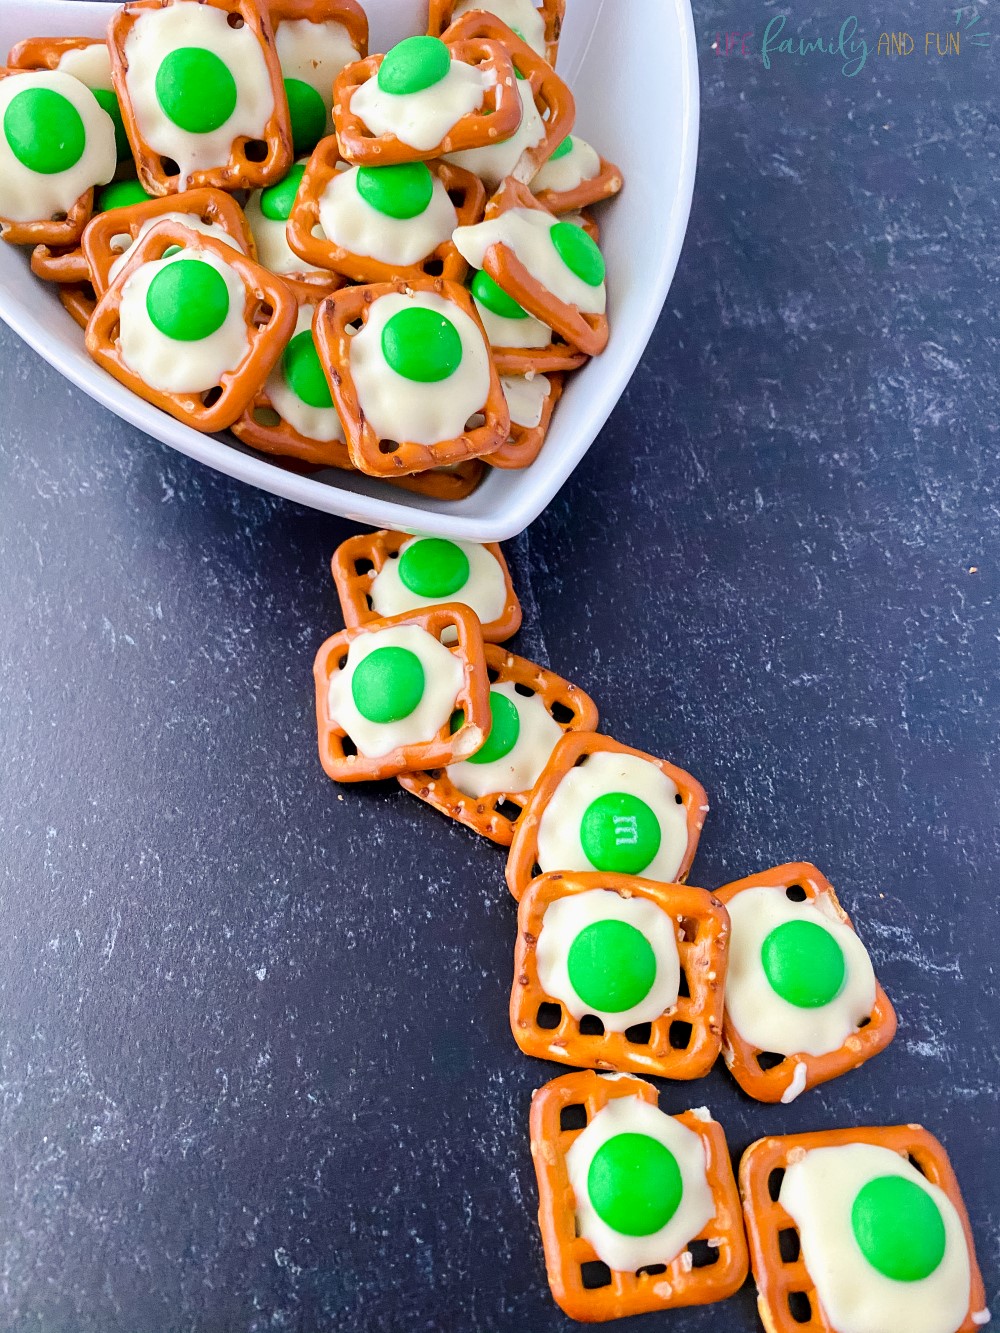 Green Eggs and Ham, Chocolate Covered Pretzels (12)